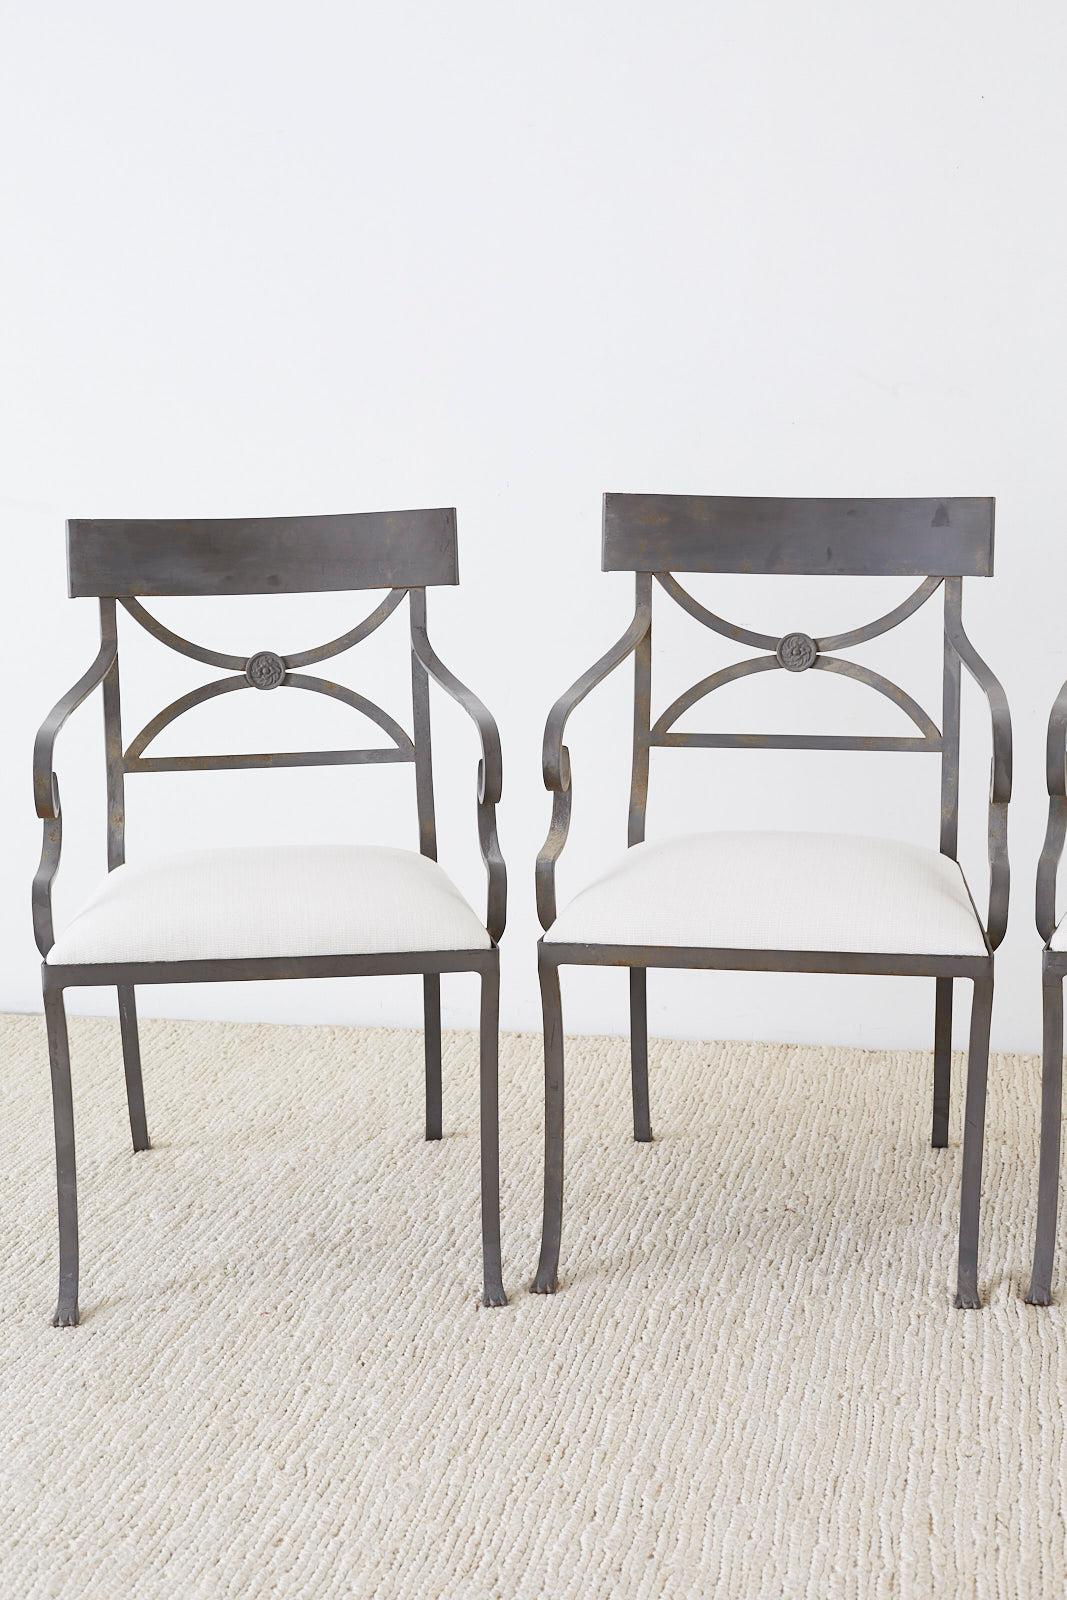 American Set of Four Regency Style Iron Garden Patio Chairs